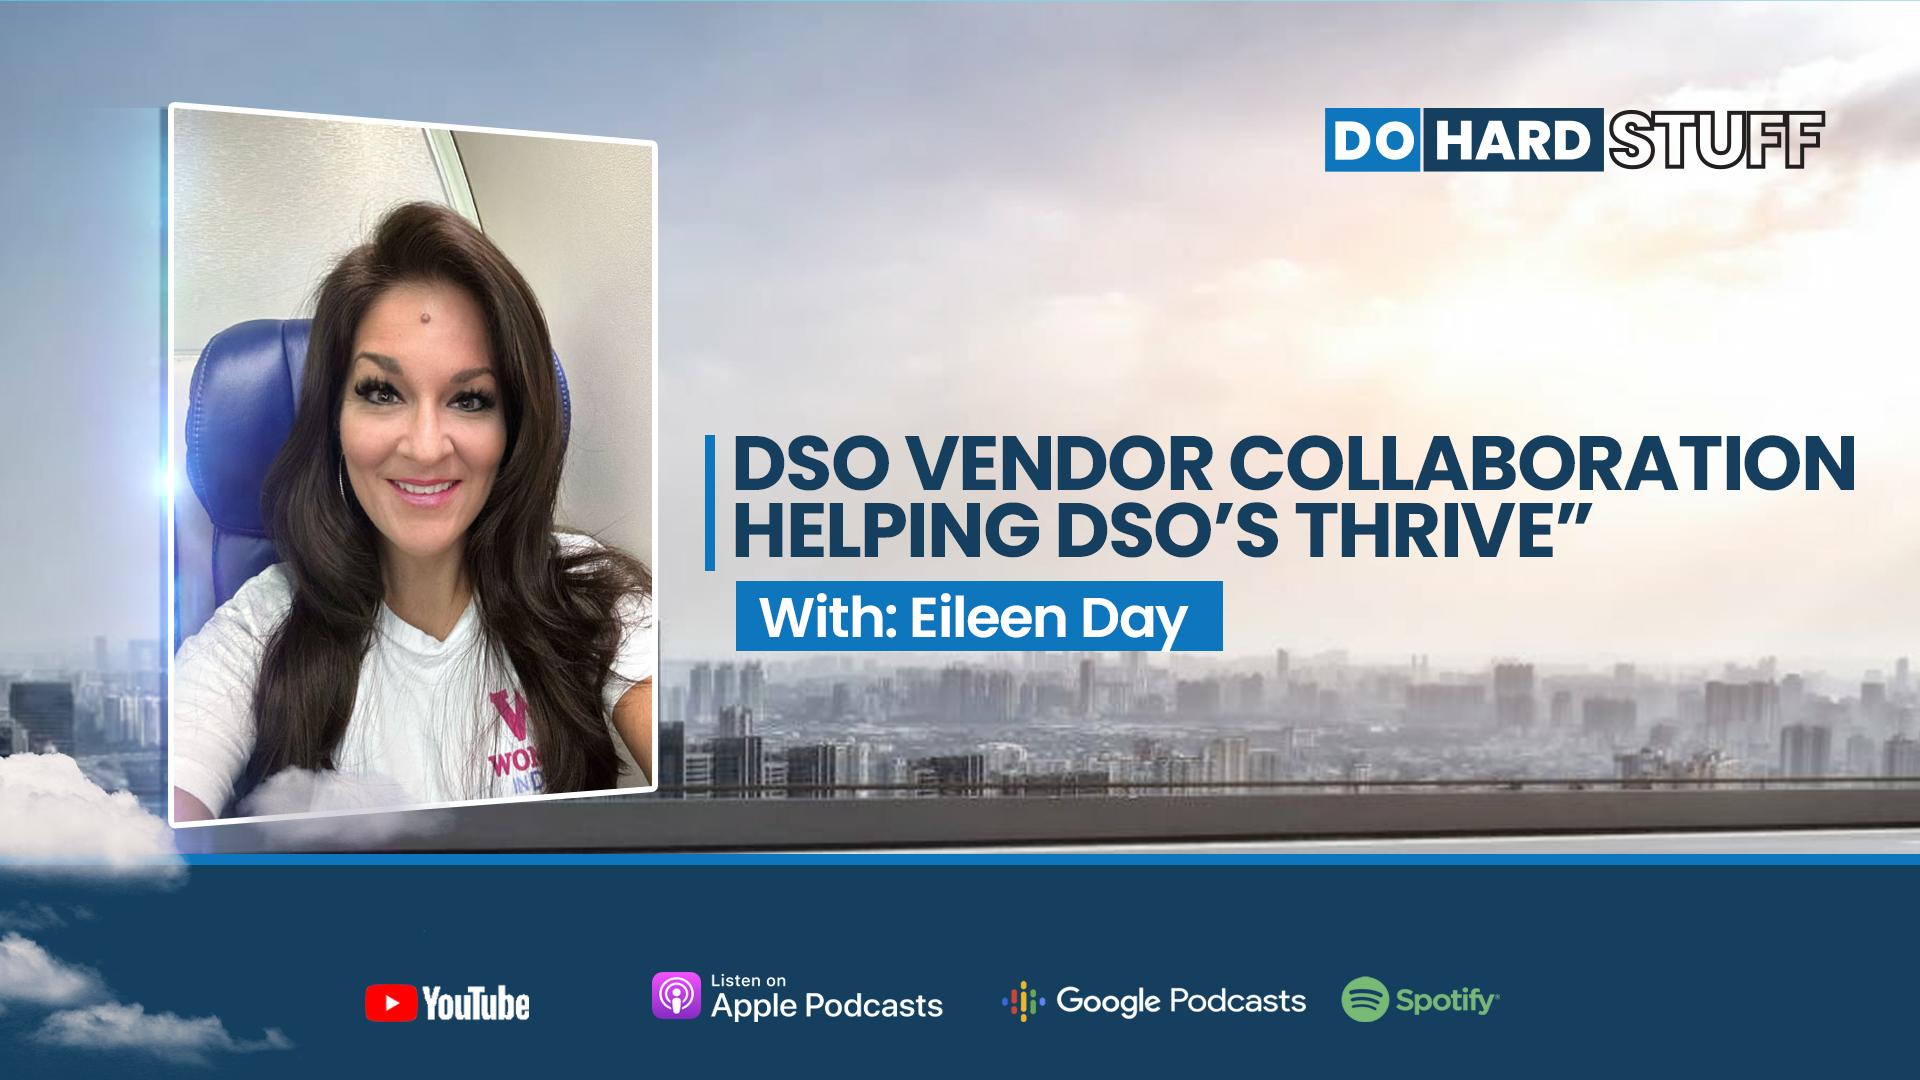 Episode 51 | DSO Vendor Collaboration Helping DSO’s Thrive